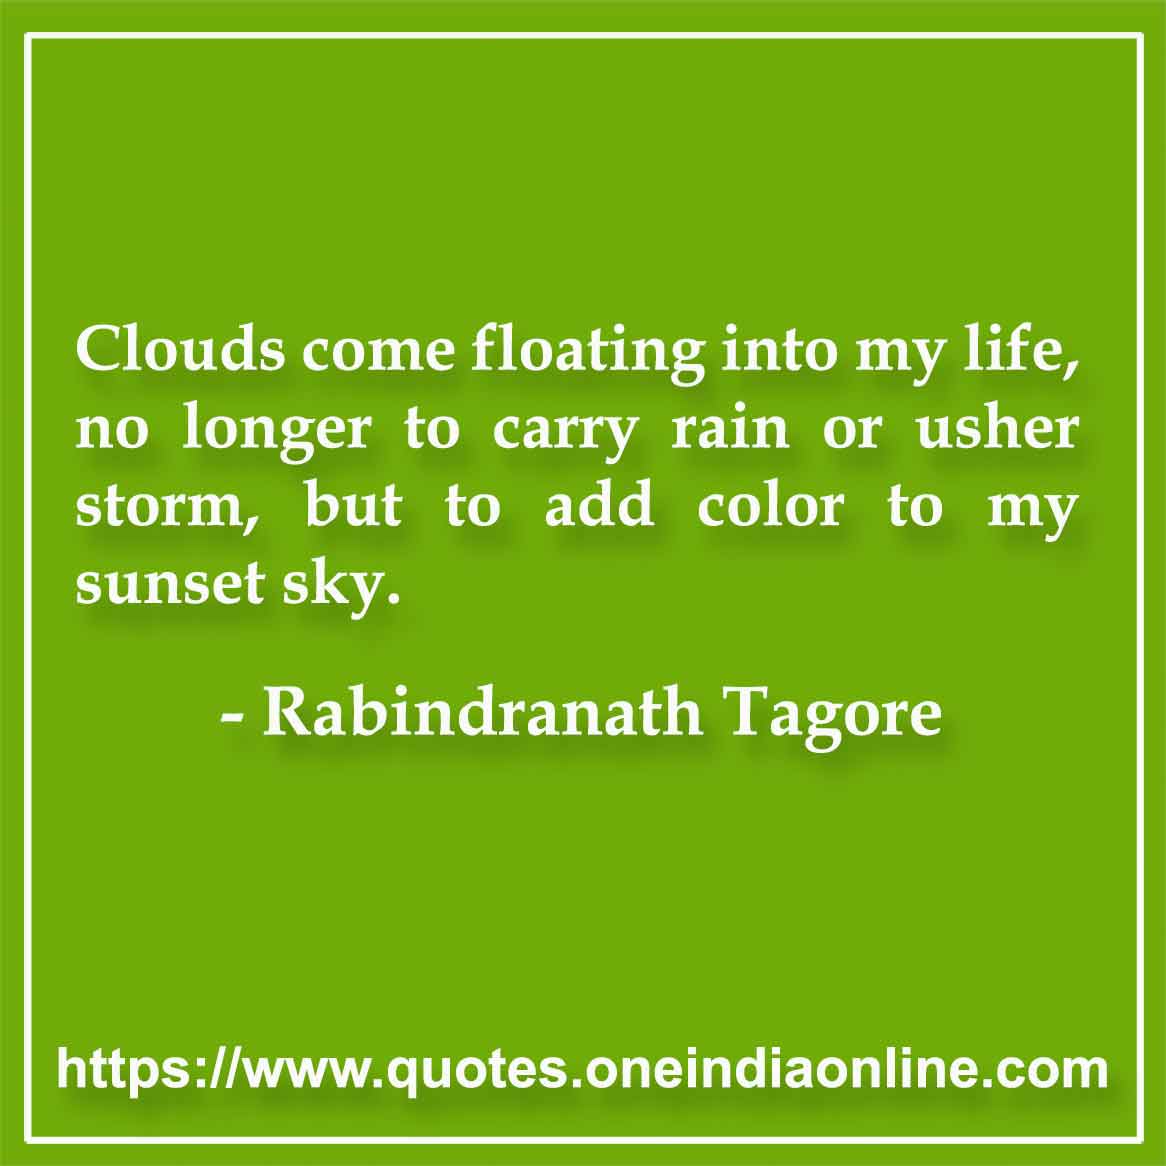 Clouds come floating into my life, no longer to carry rain or usher storm, but to add color to my sunset sky.

